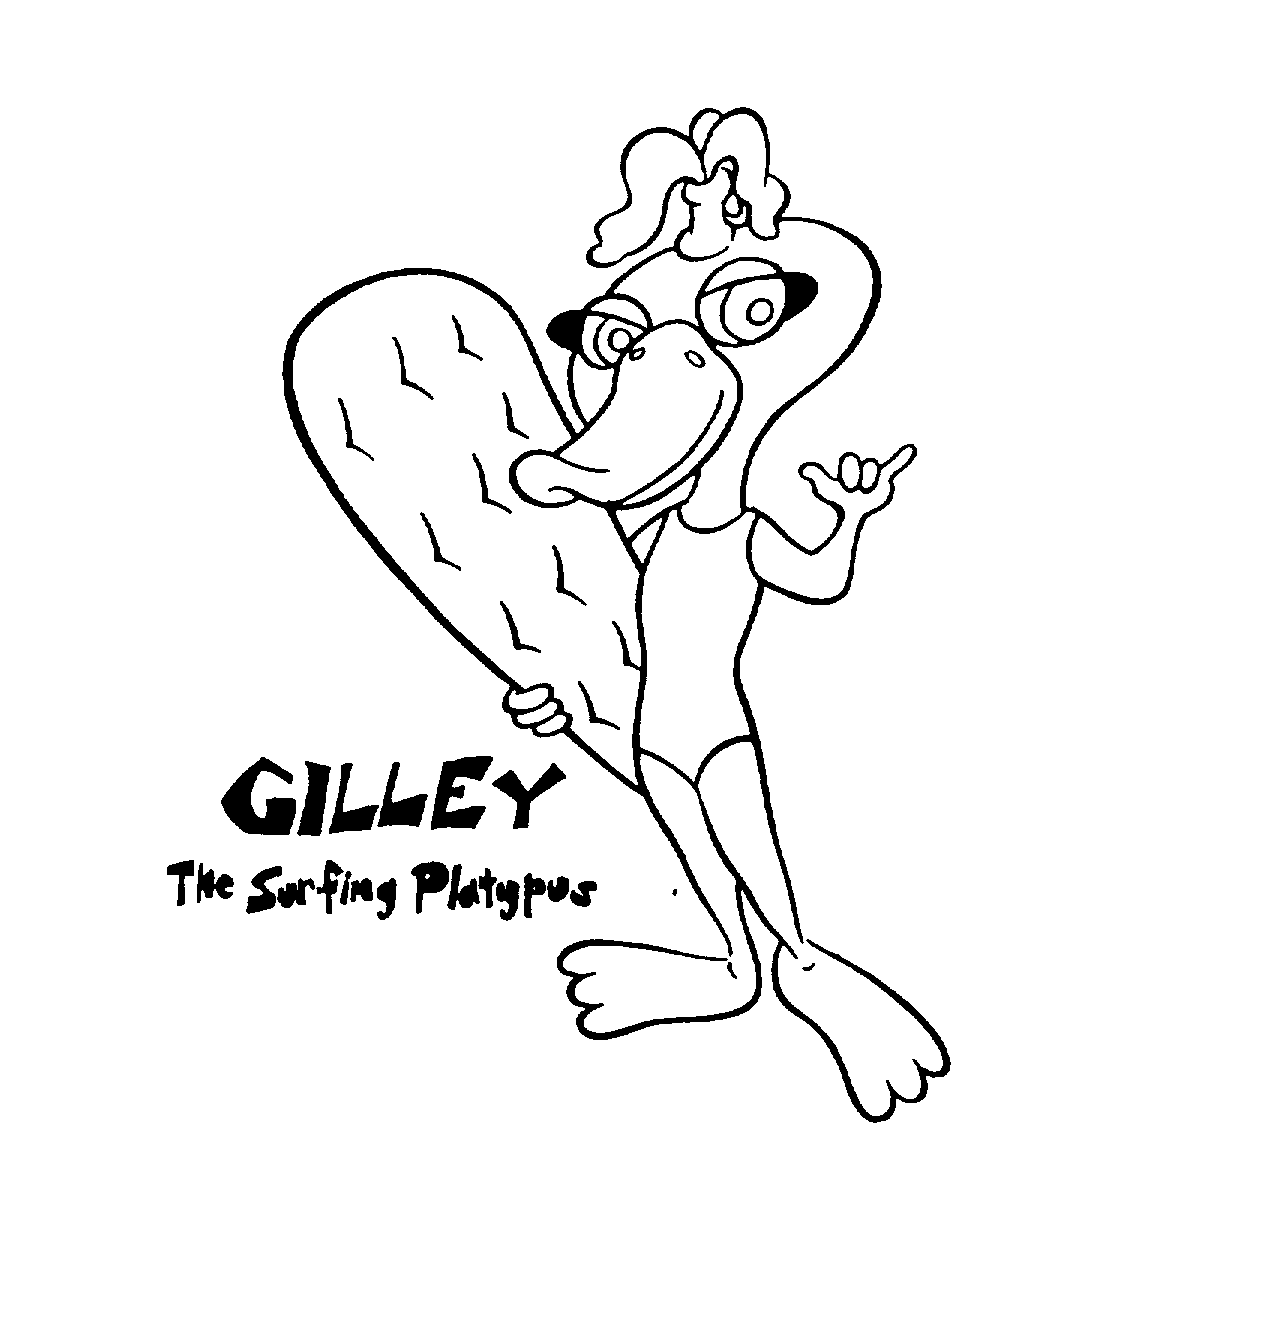  GILLY THE SURFING PLATYPUS